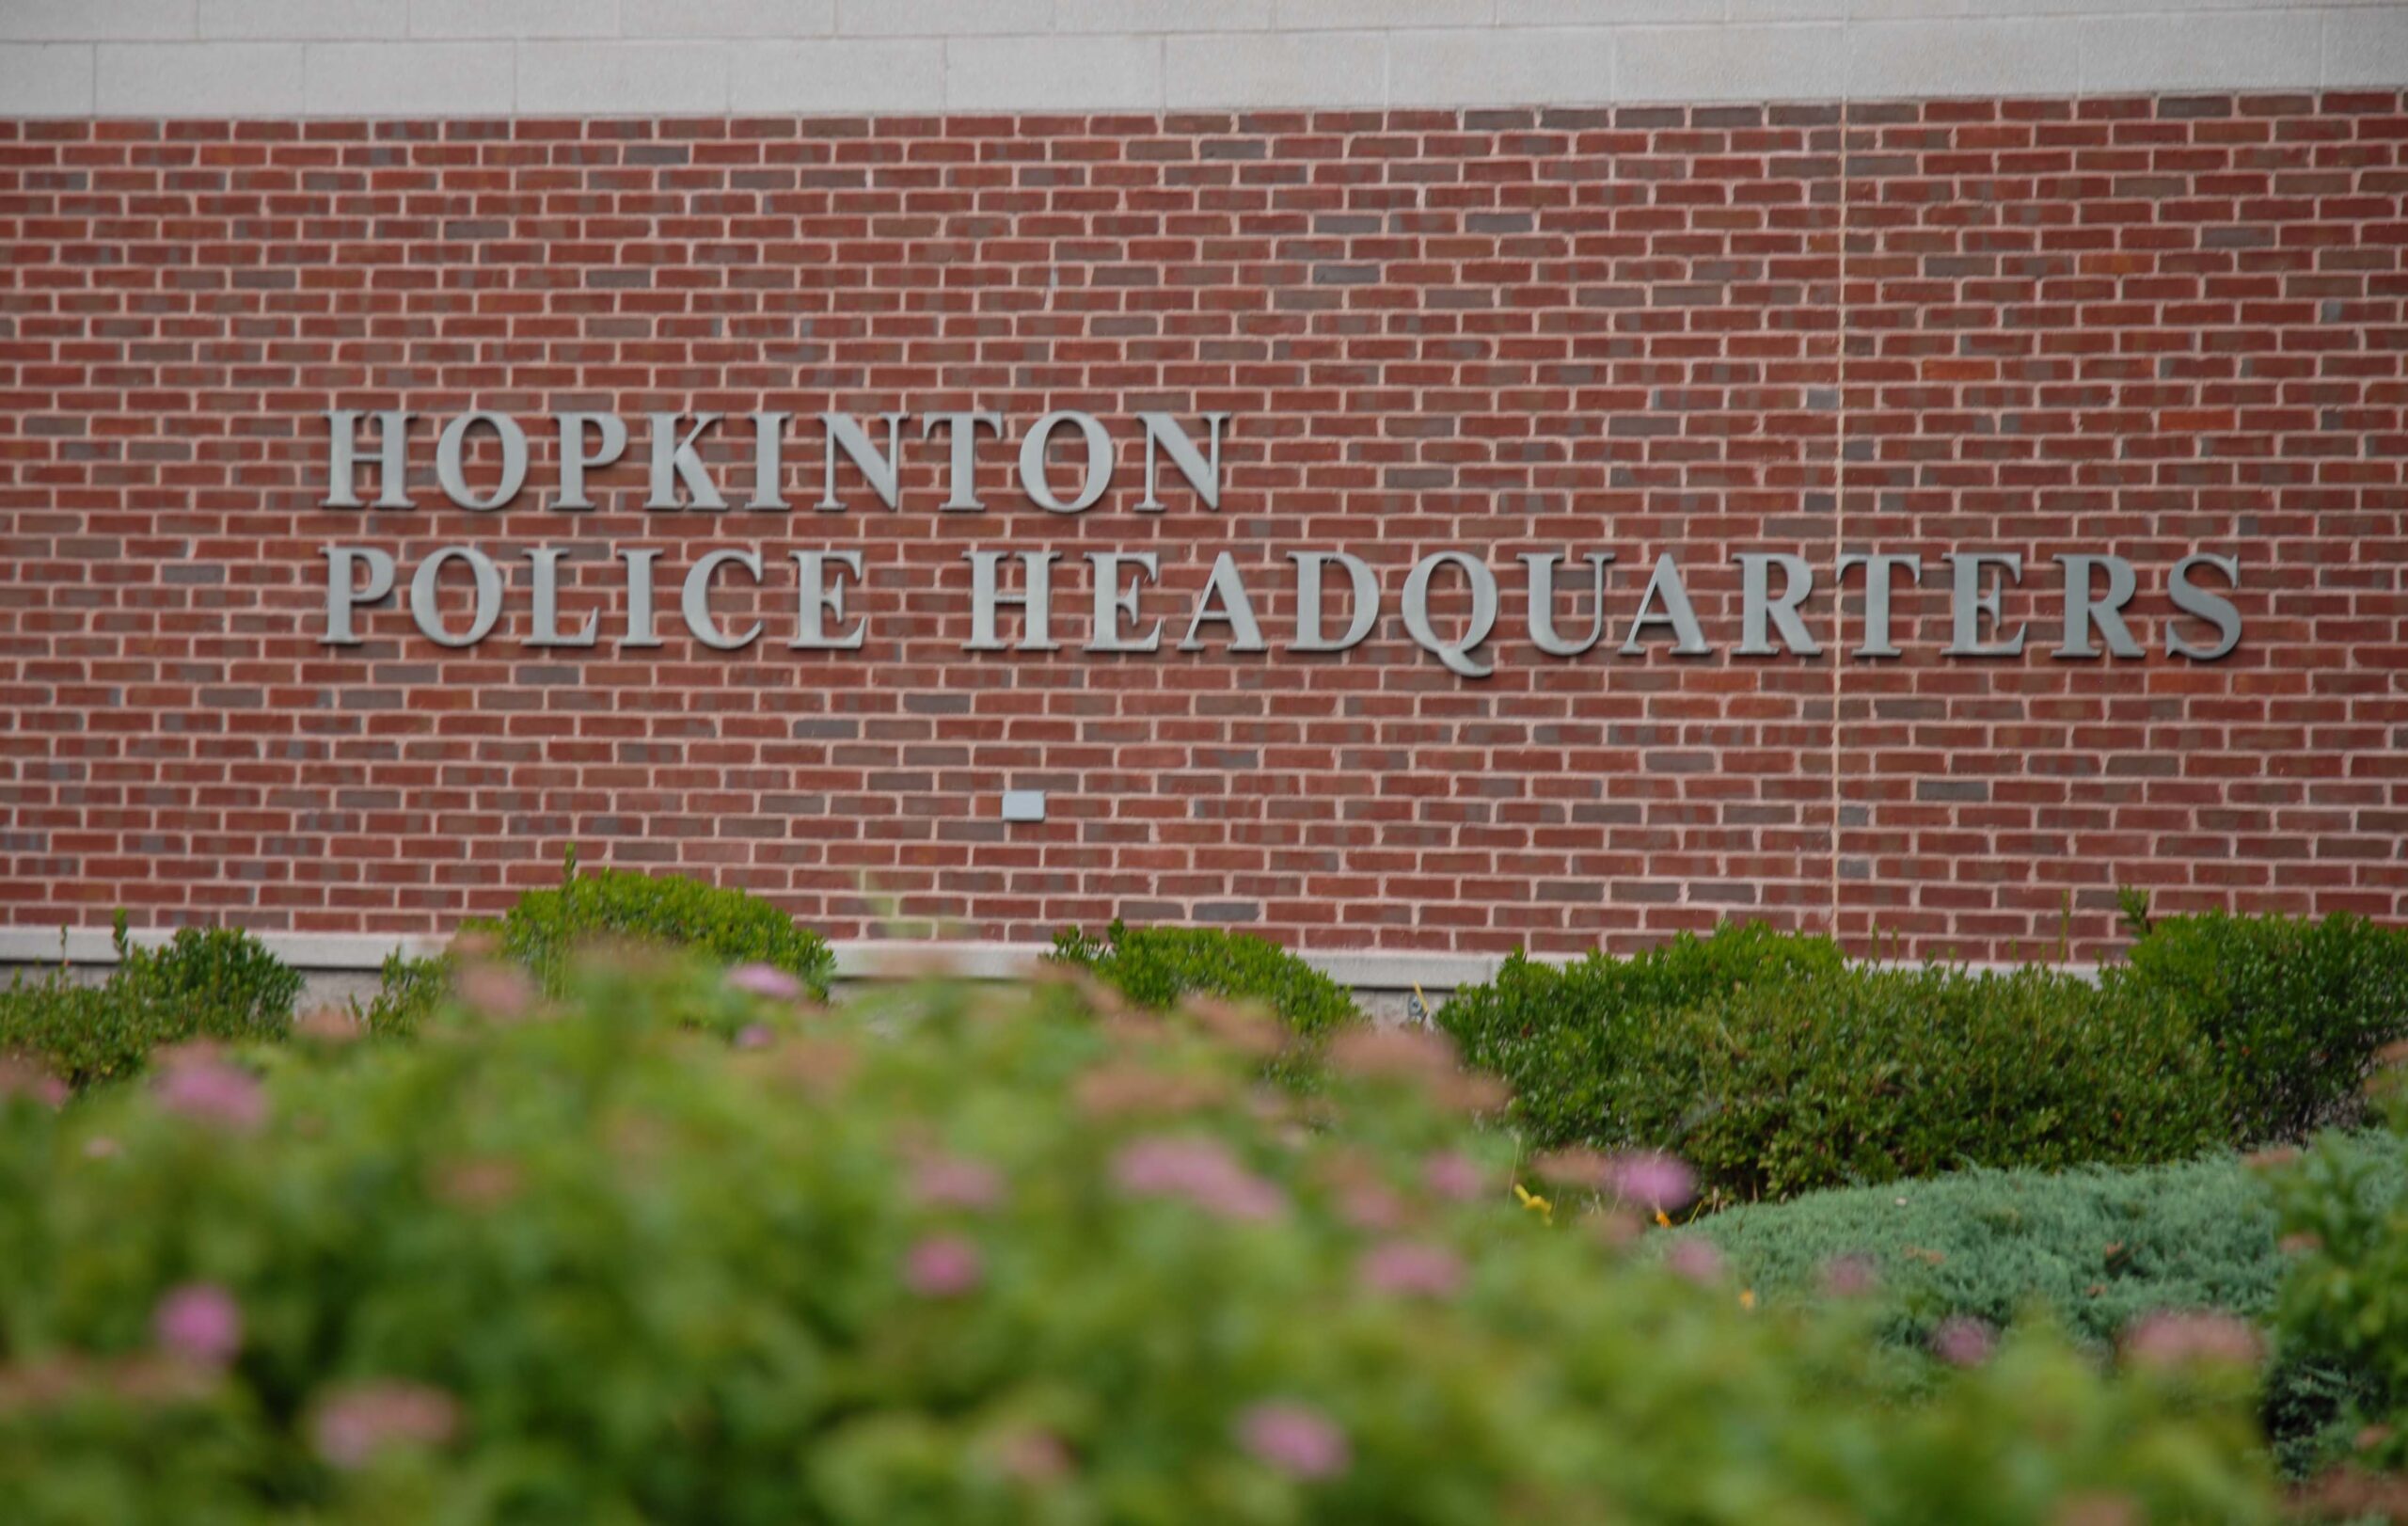 Police arrest, charge man for allegedly scamming Hopkinton resident of $10K